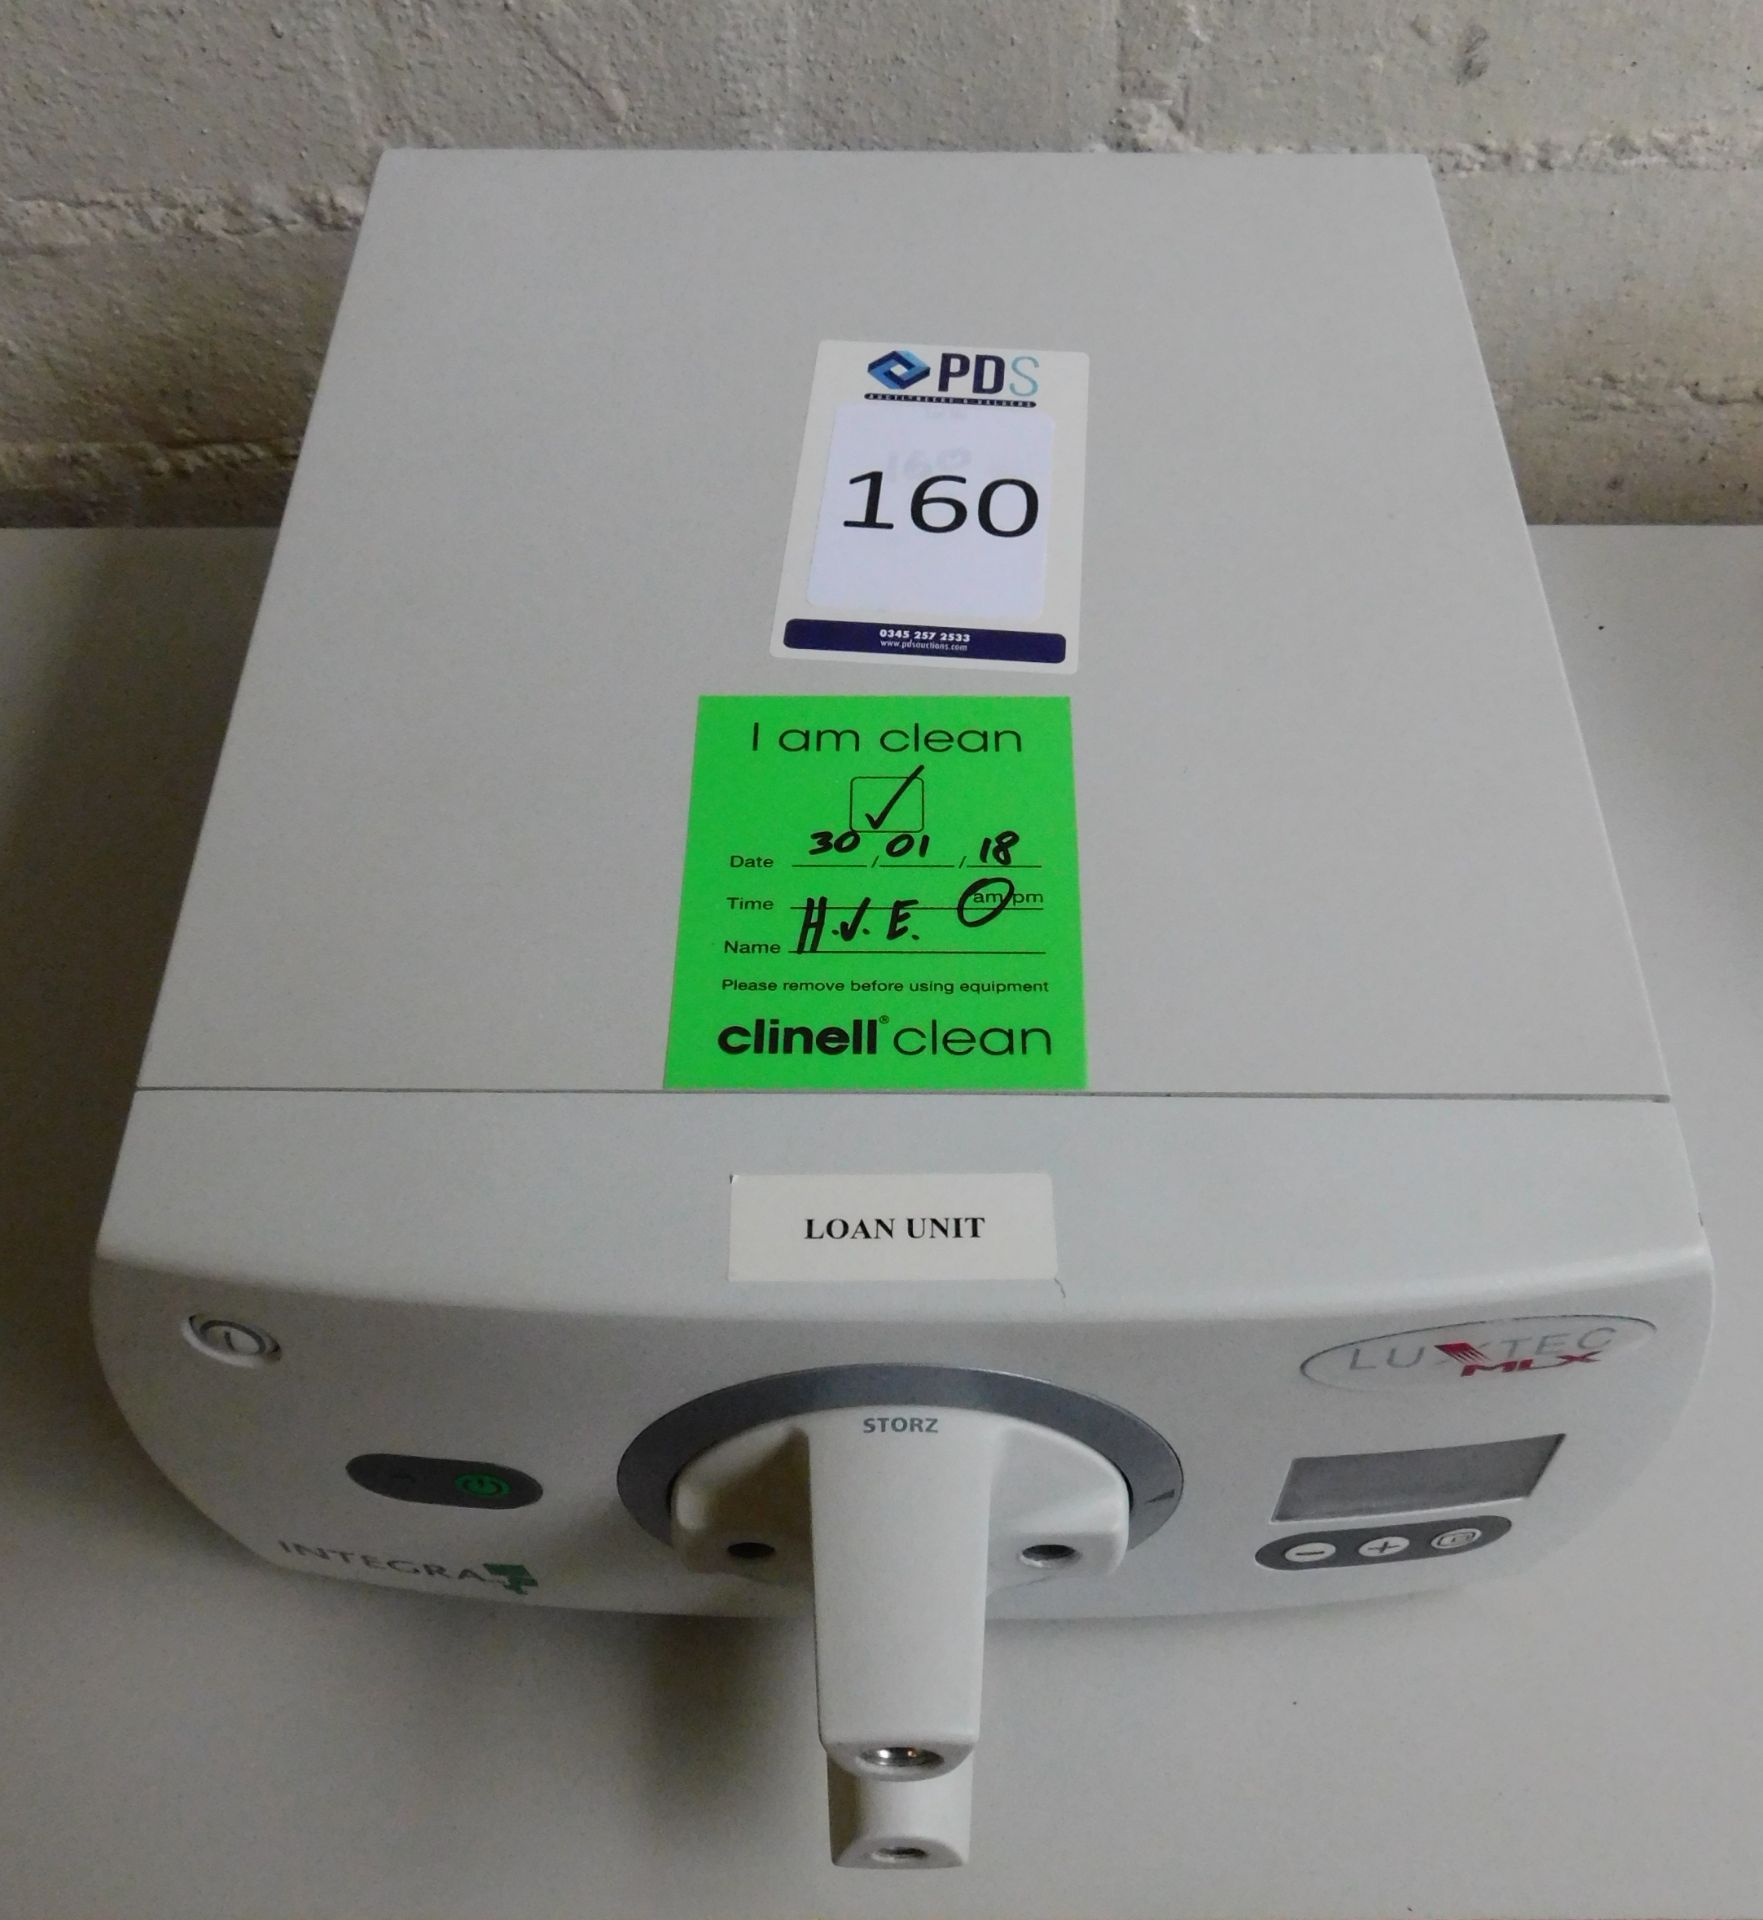 Integra LuxTec MLX Surgical Light Source, Serial Number 13A00MLX10562 (Location: Bushey. Please